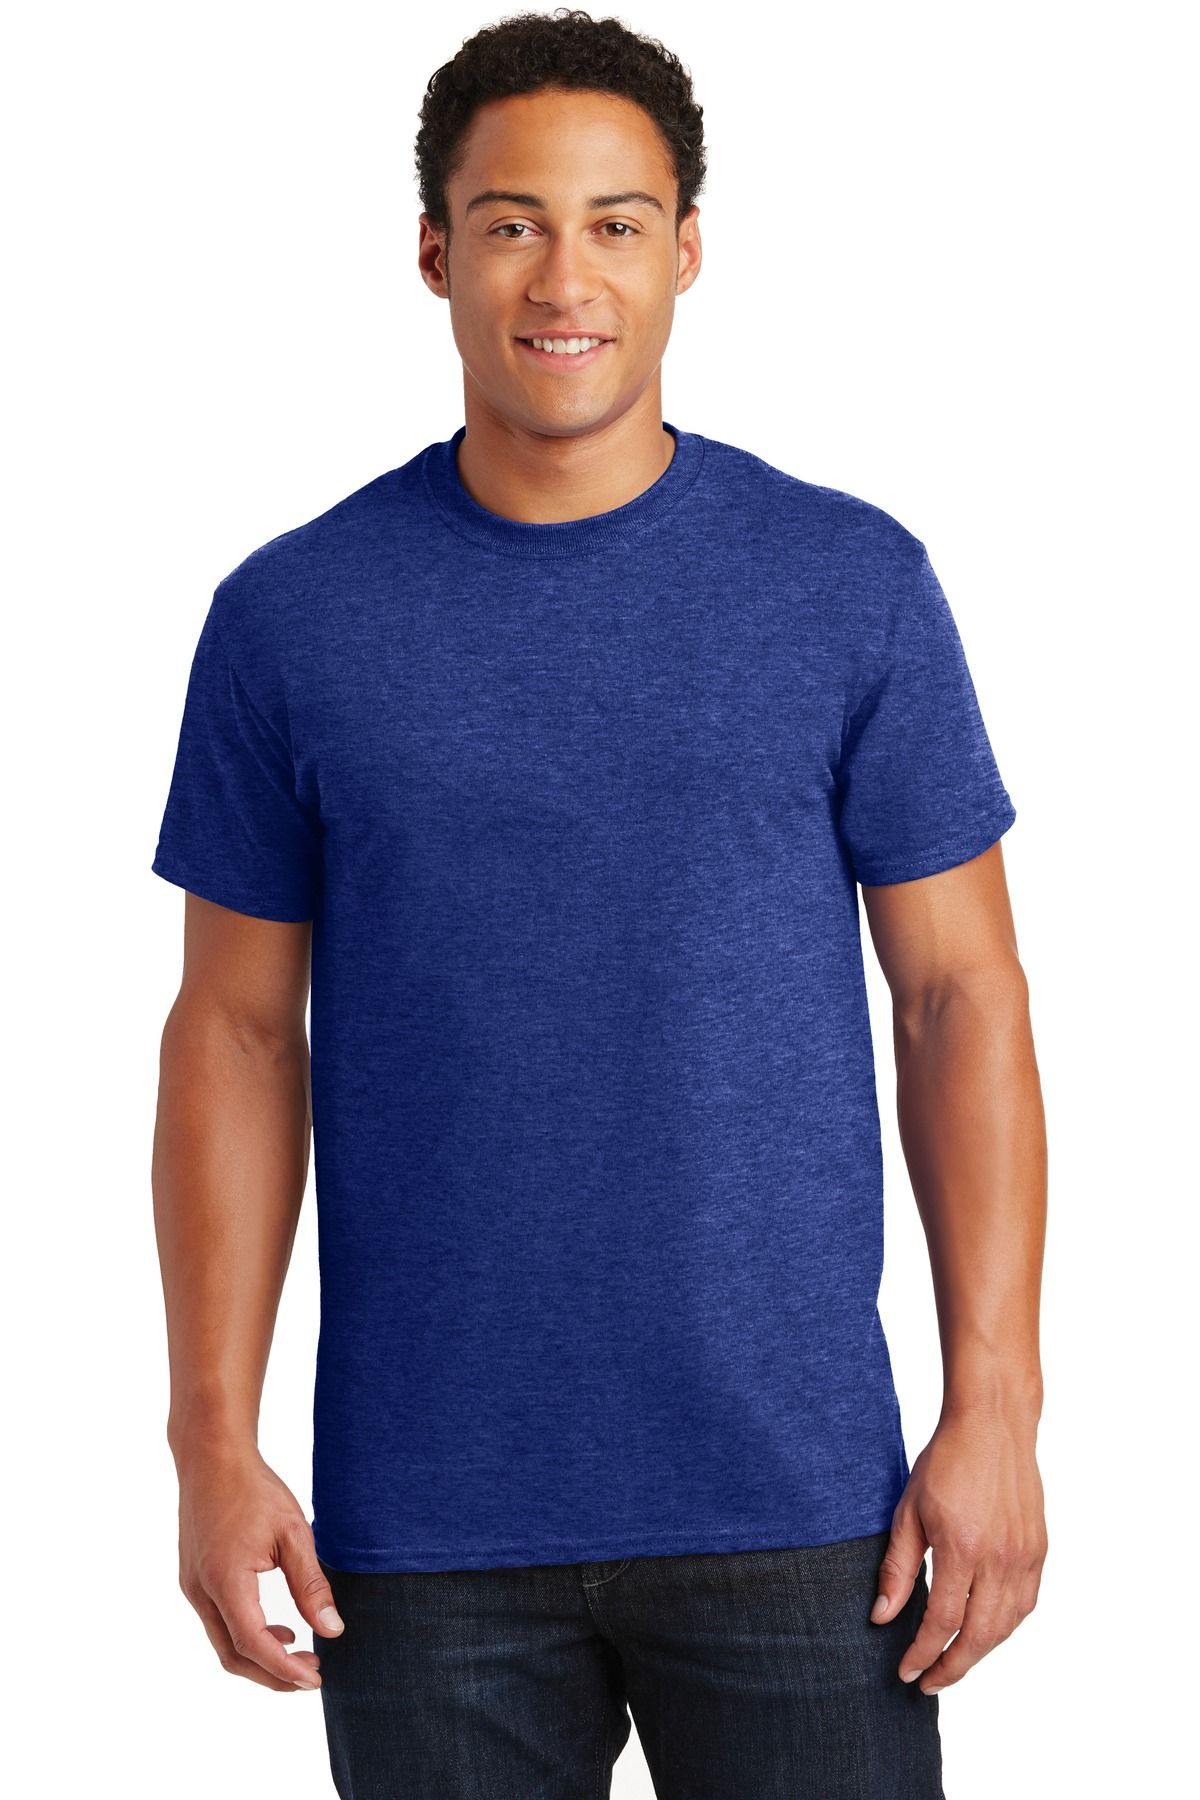 A guy in a blue t-shirt